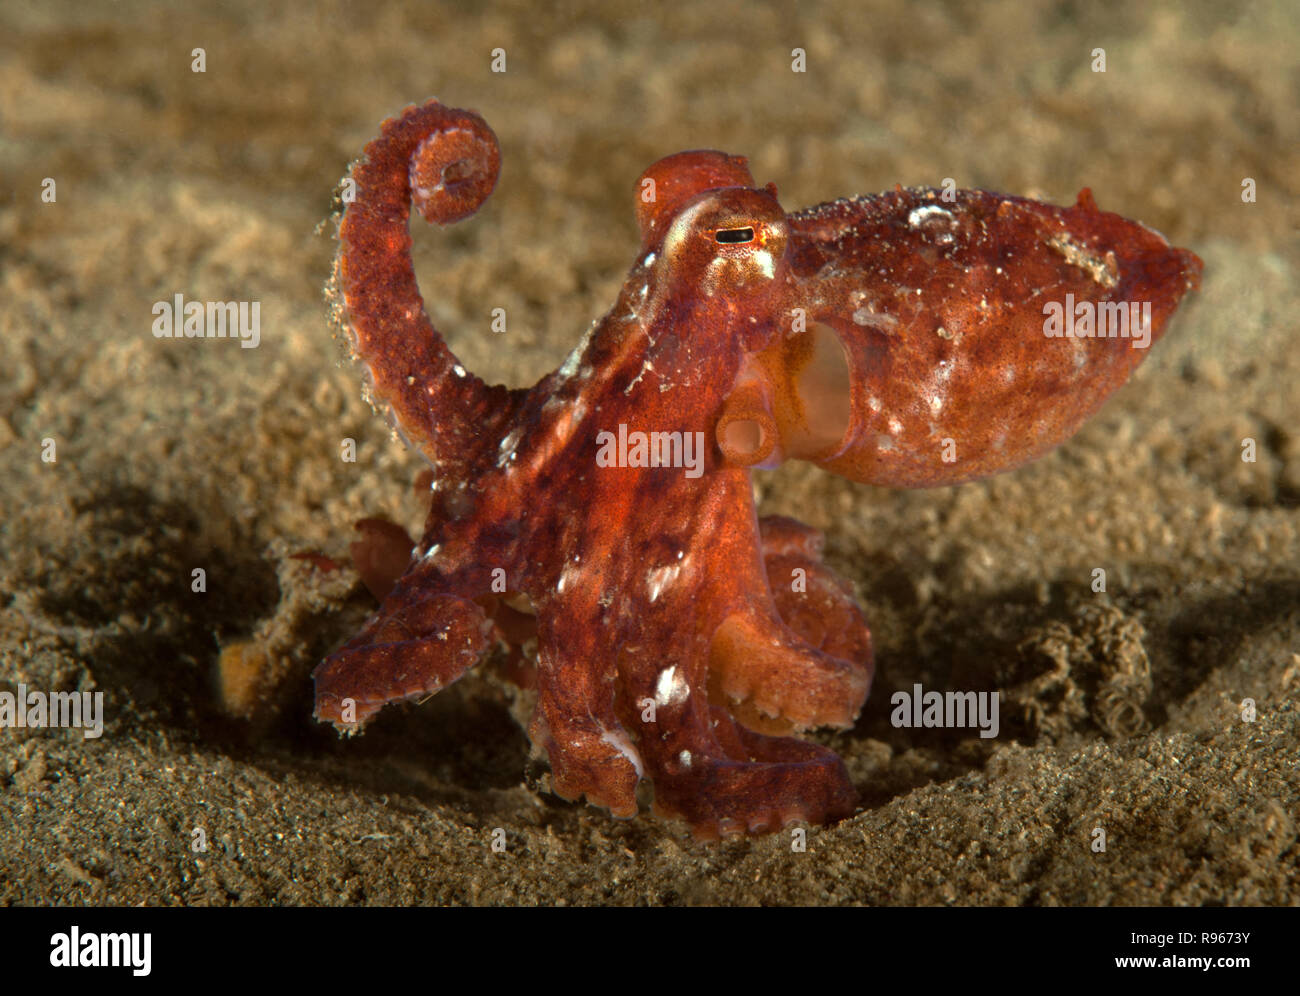 Octopus rubescens, Red octopus Stock Photo